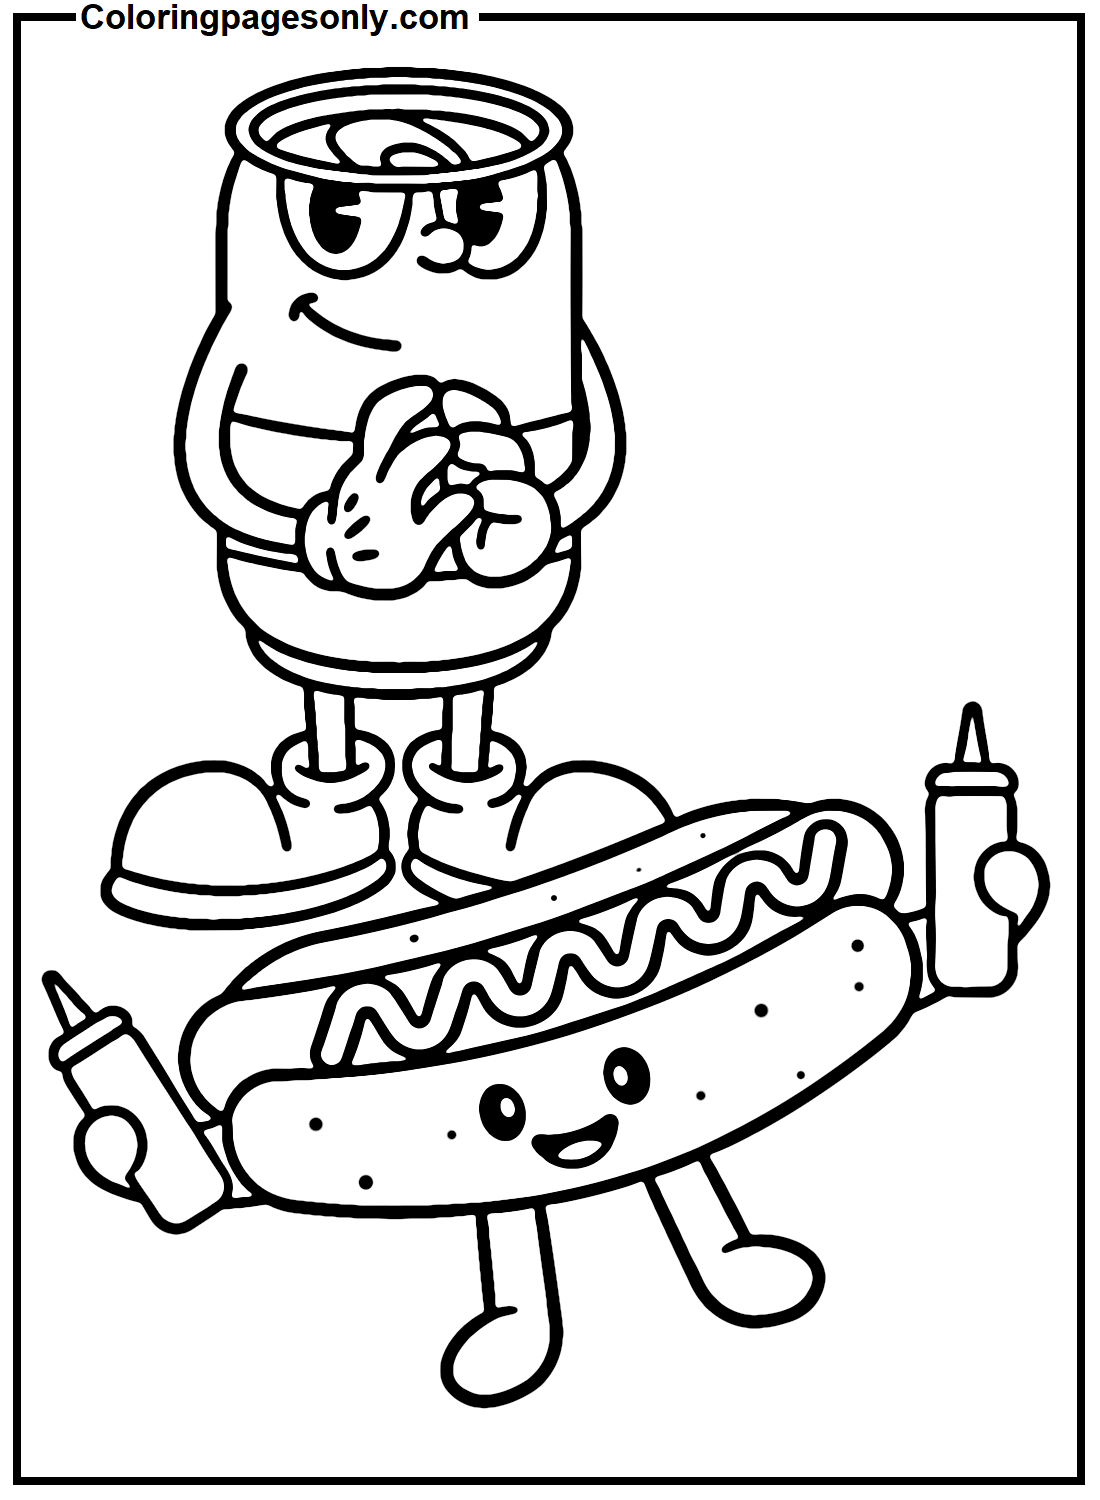 Hot Dog Holding Mustard And Sauce Coloring Pages